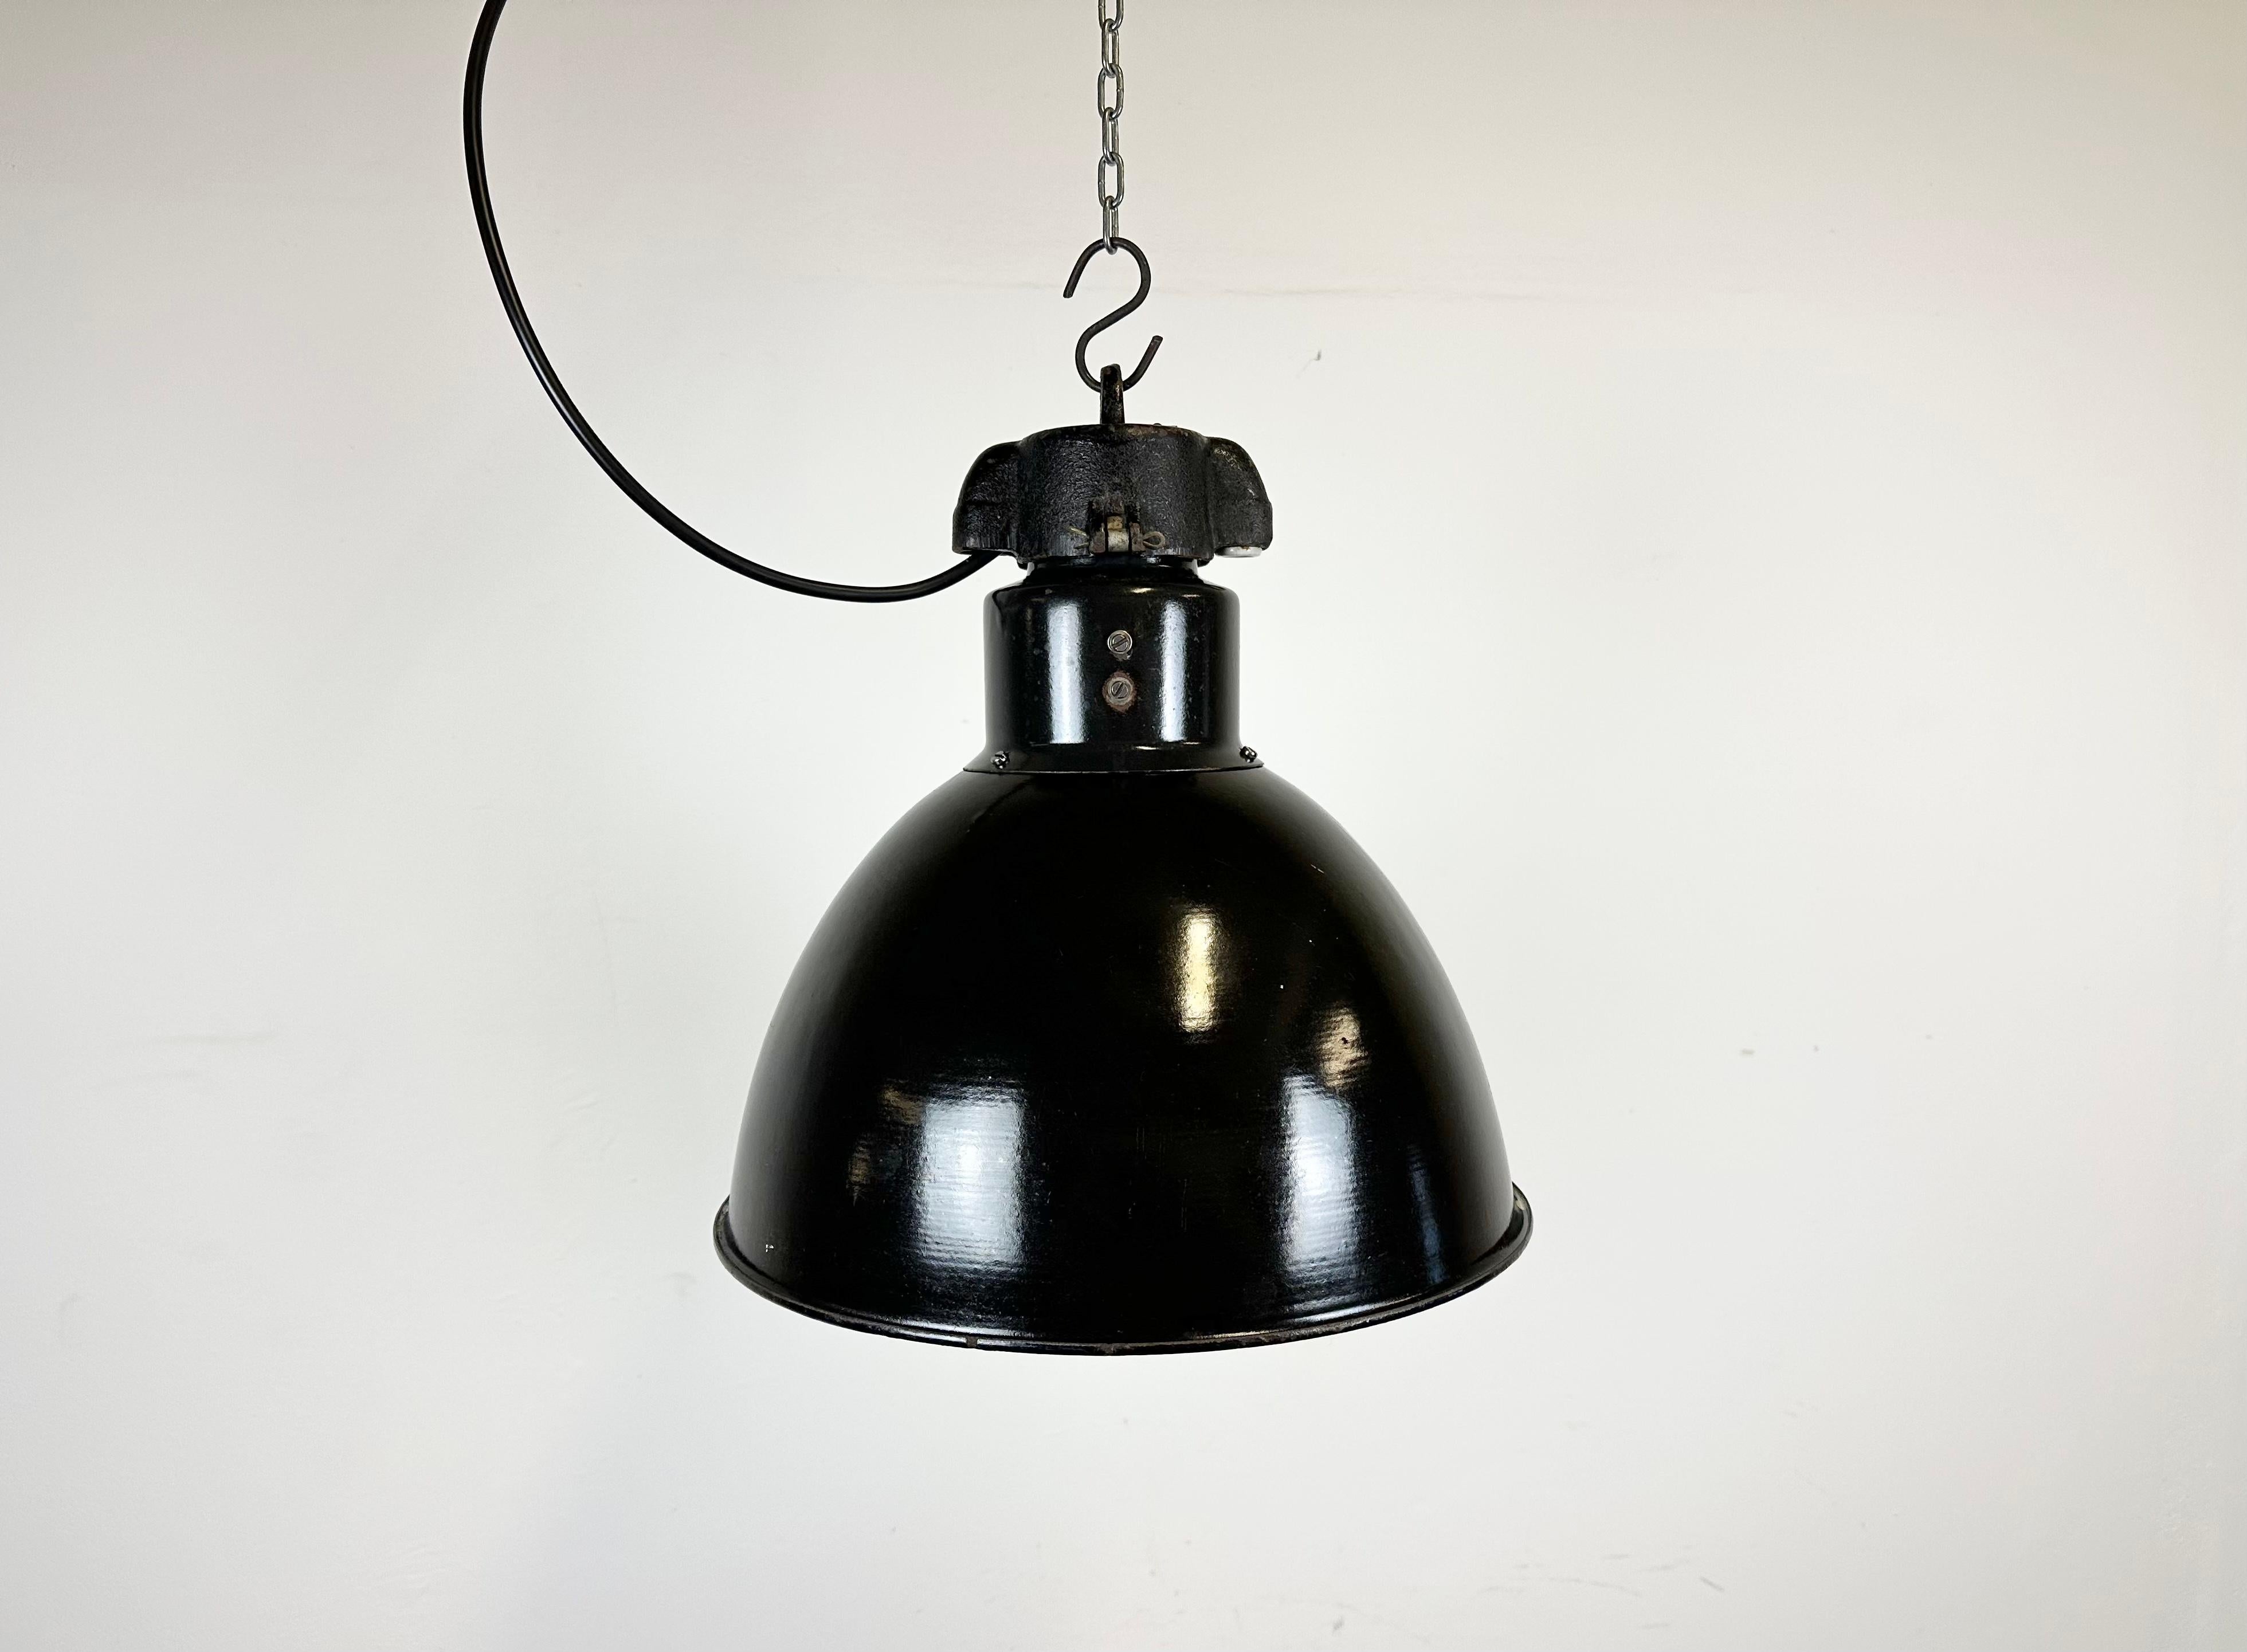 Industrial black enamel pendant light made by Elektrosvit in former Czechoslovakia. Designed in the period of Bauhaus. White enamel inside the shade. Cast iron top. New porcelain socket for E 27 lightbulbs and wire. Fully functional. The weight of